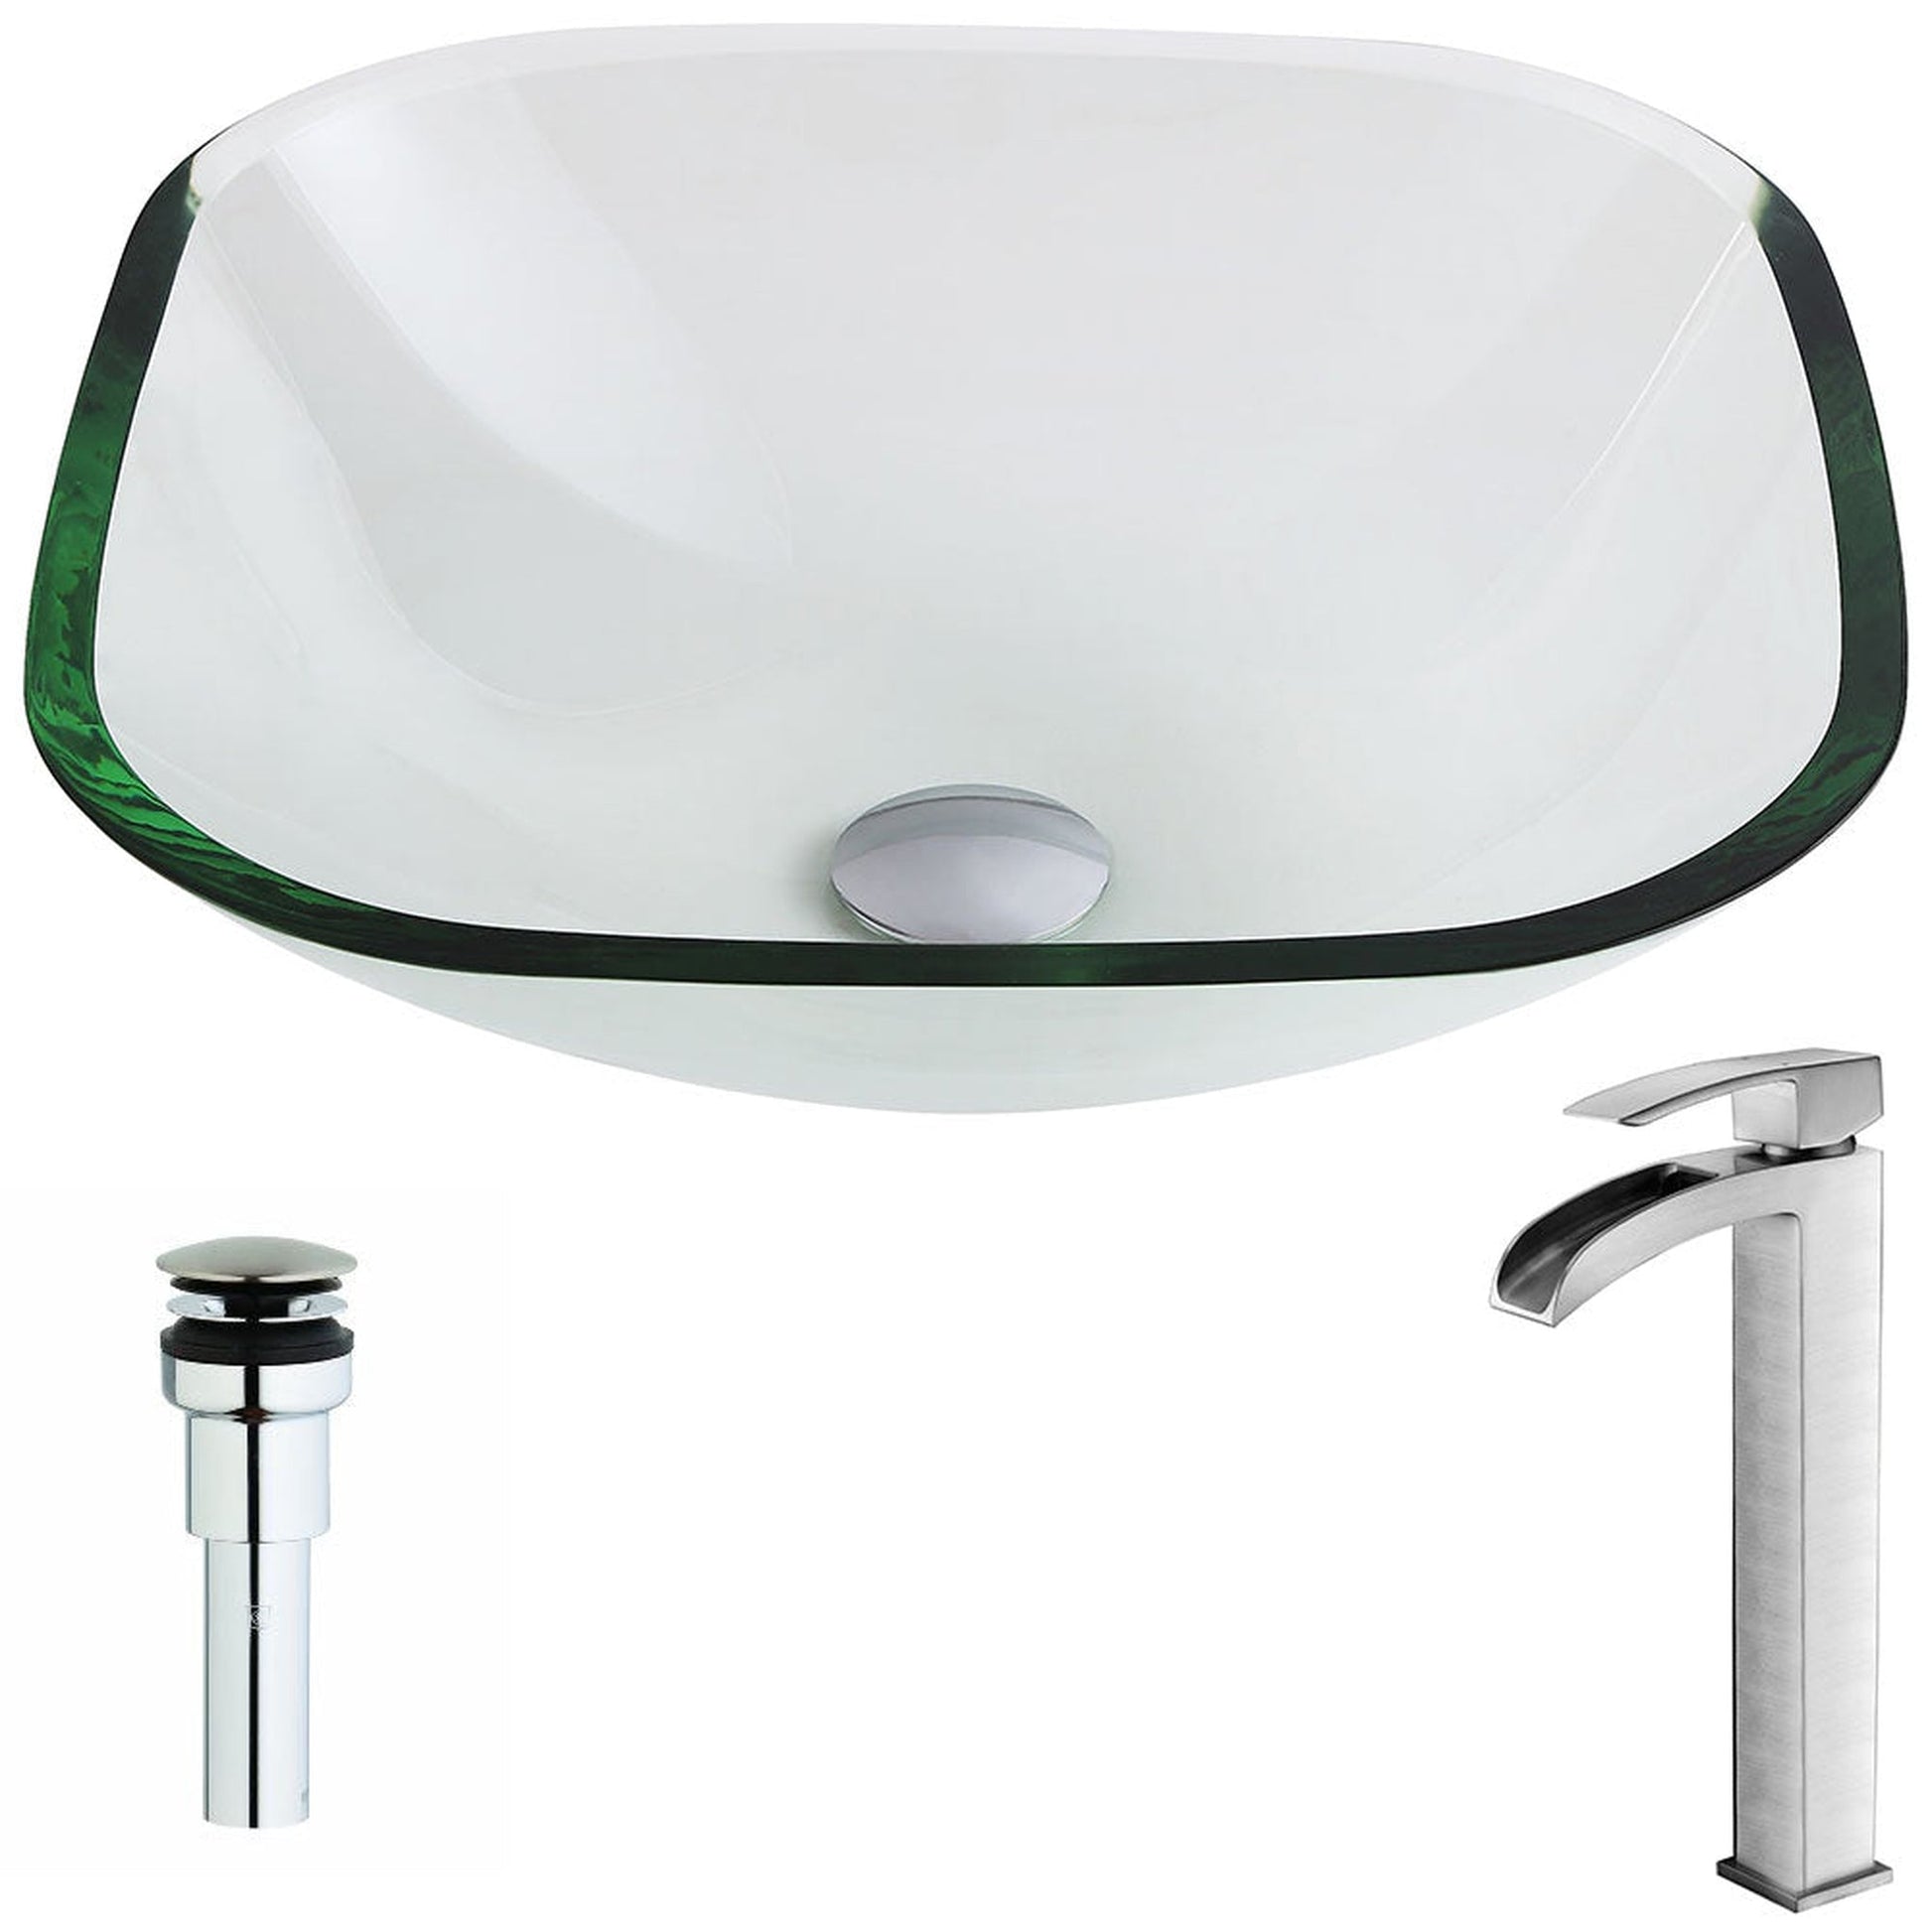 ANZZI Cadenza Series 17" x 17" Square Shape Lustrous Clear Deco-Glass Vessel Sink With Chrome Pop-Up Drain and Brushed Nickel Key Faucet